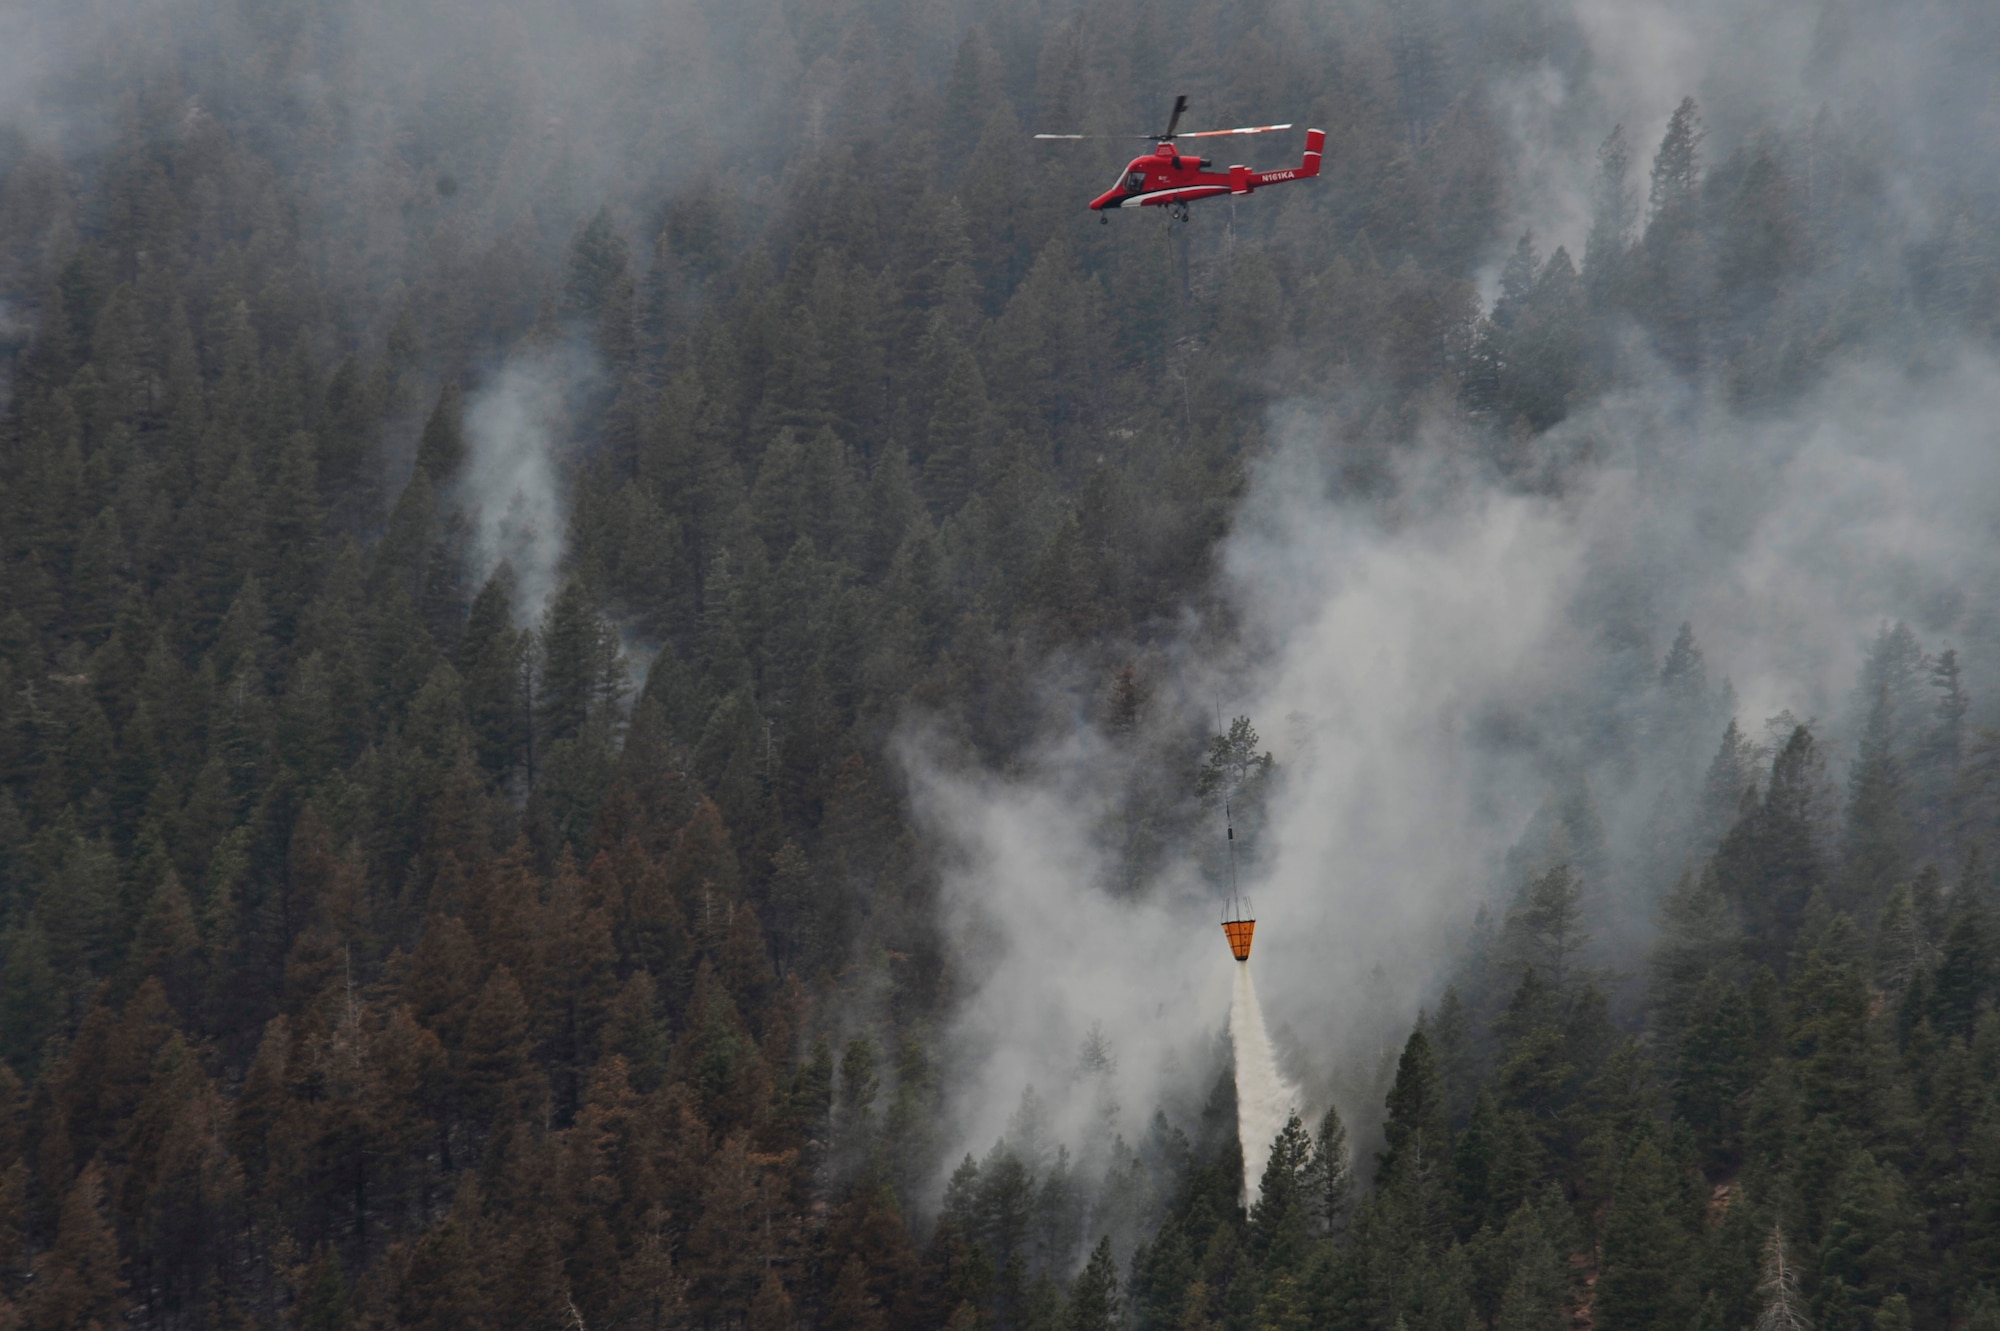 A helicopter dumps water on the Waldo Canyon Fire that has spread to the outskirts of the Air Force Academy, Colo., June 28. The Waldo Canyon fire has destroyed over 18,000 acres in the Colorado Springs area. (U.S. Air Force photo by Staff Sgt. Christopher Boitz)